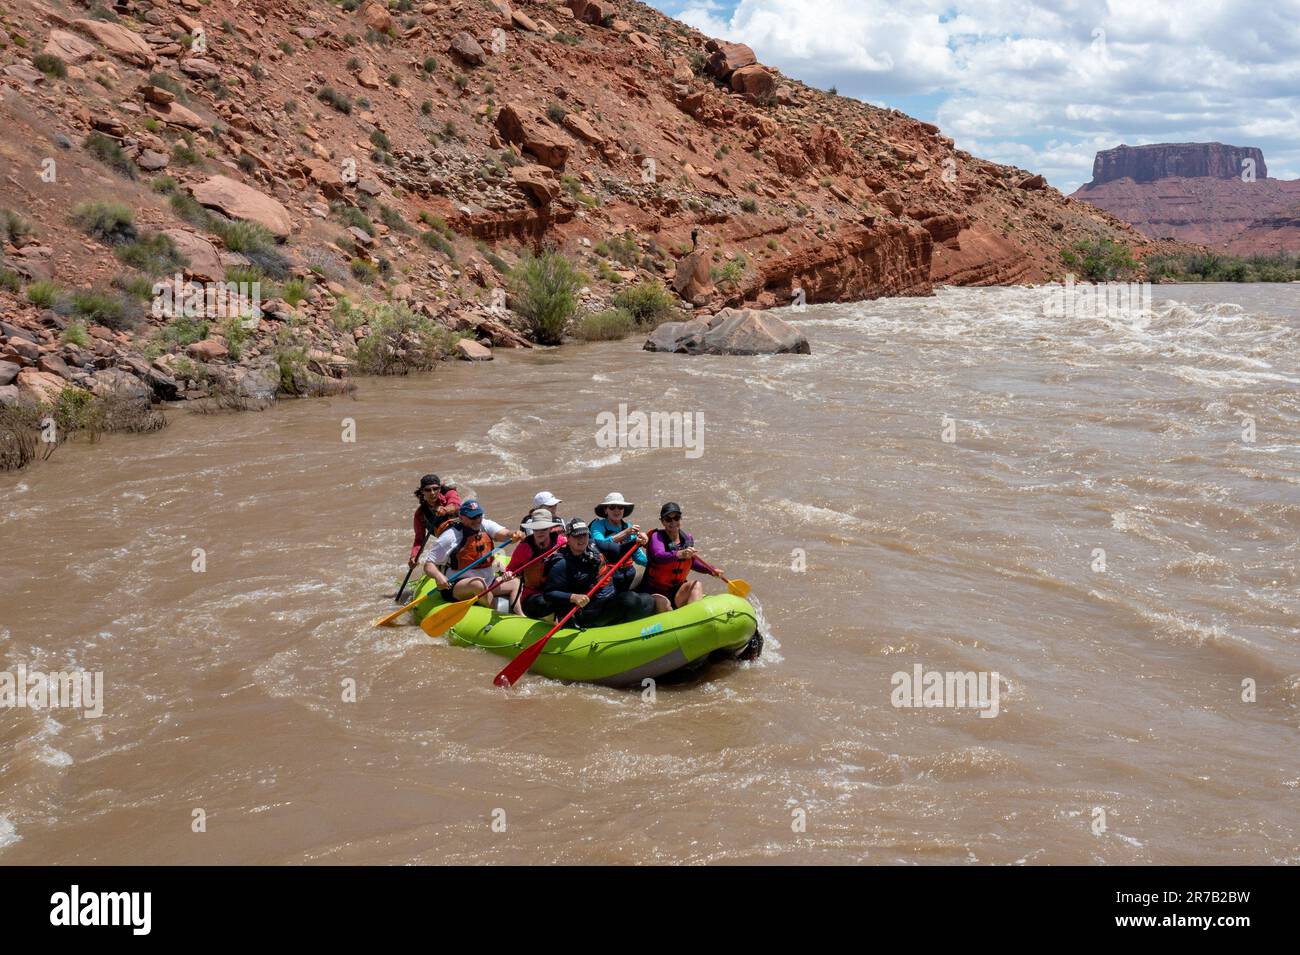 Tourists enjoy a rafting trip through the big waves in White's Rapid on the Colorado River at high water.  Moab, Utah. Stock Photo